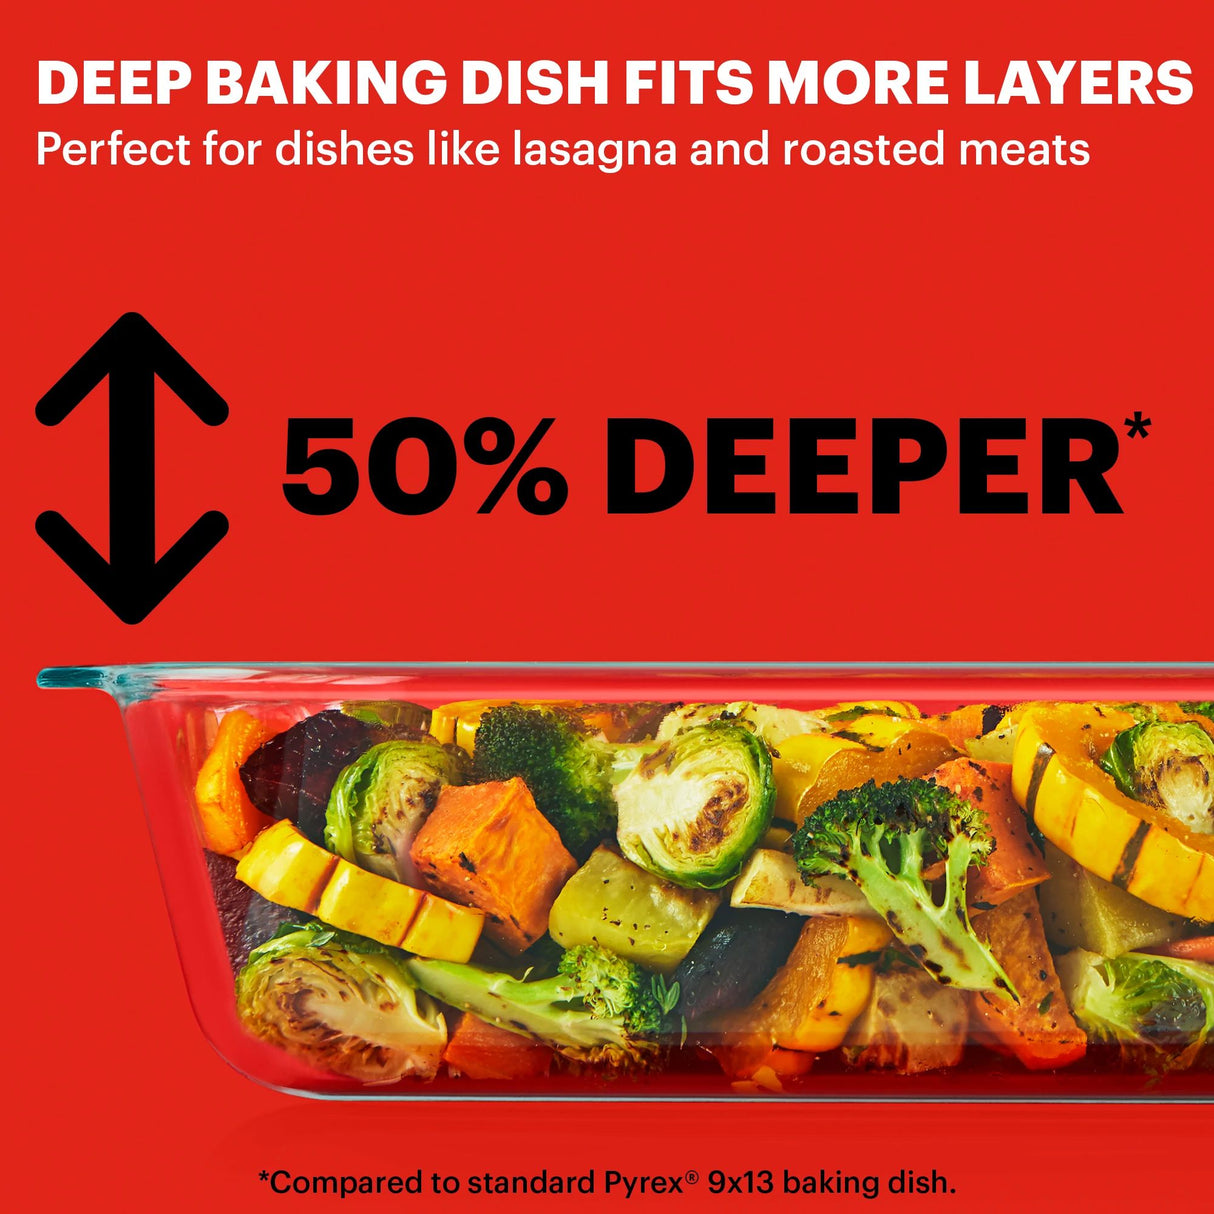  text Deep baking dish fits more layers perfect for lasagna &amp; roasted meats